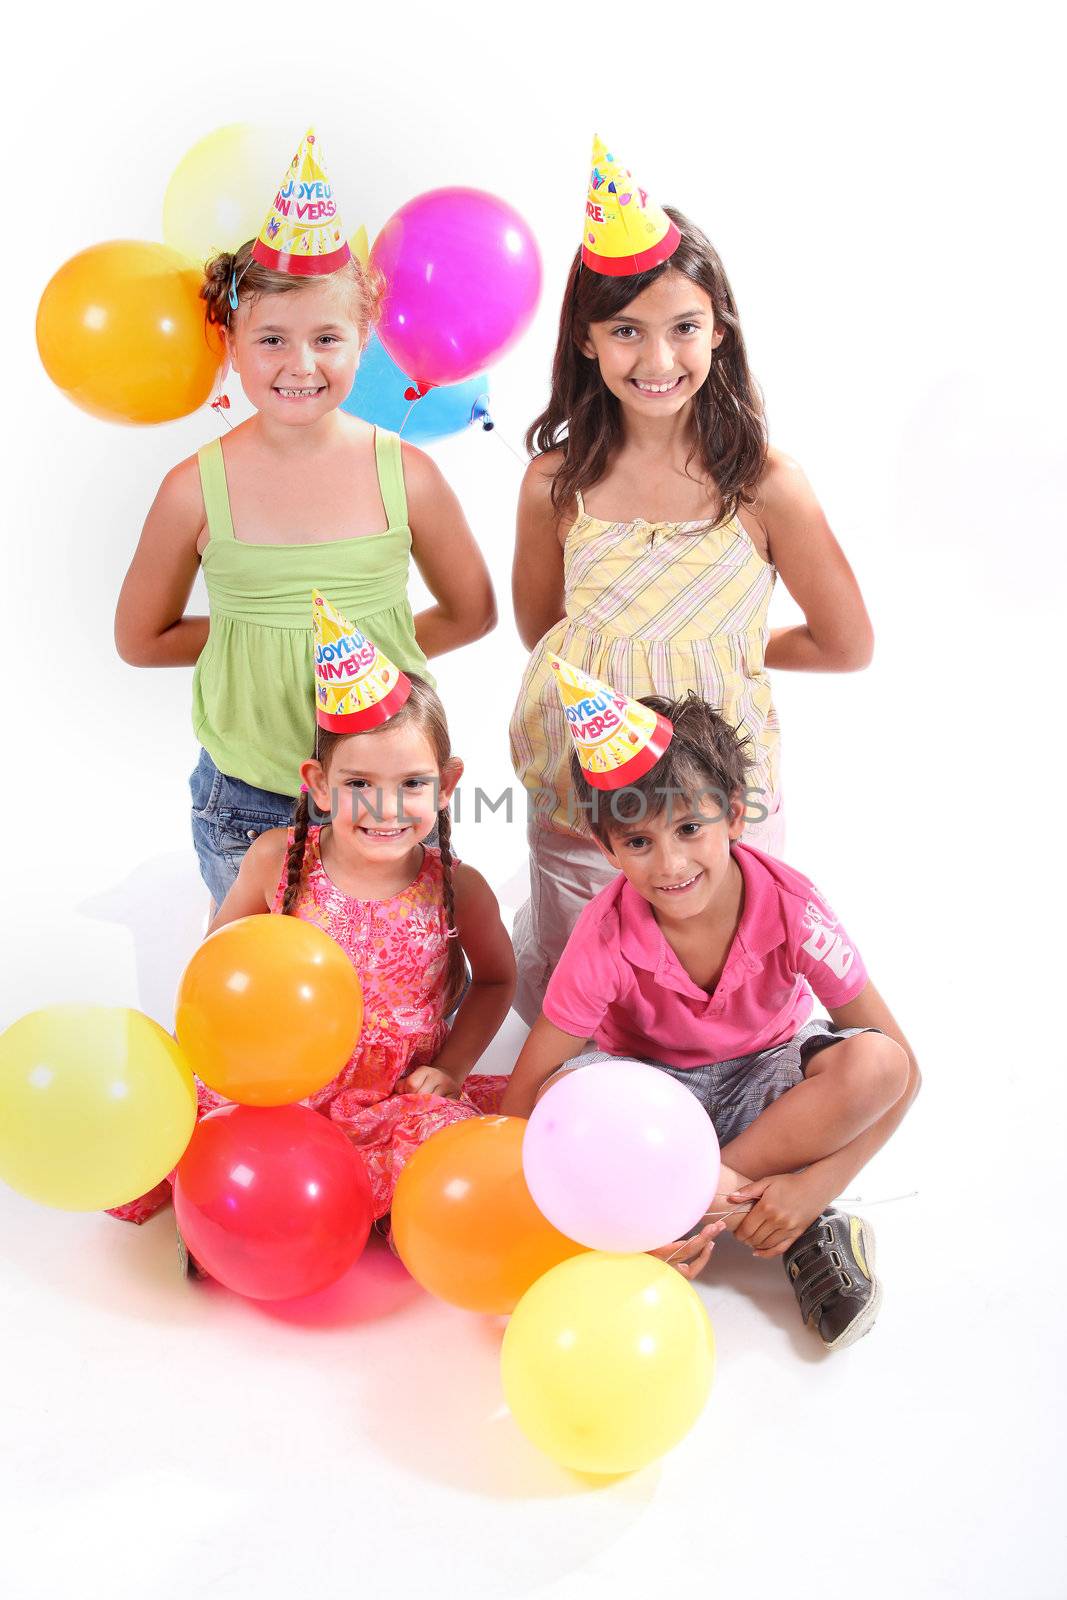 Child Birthday Party by phovoir